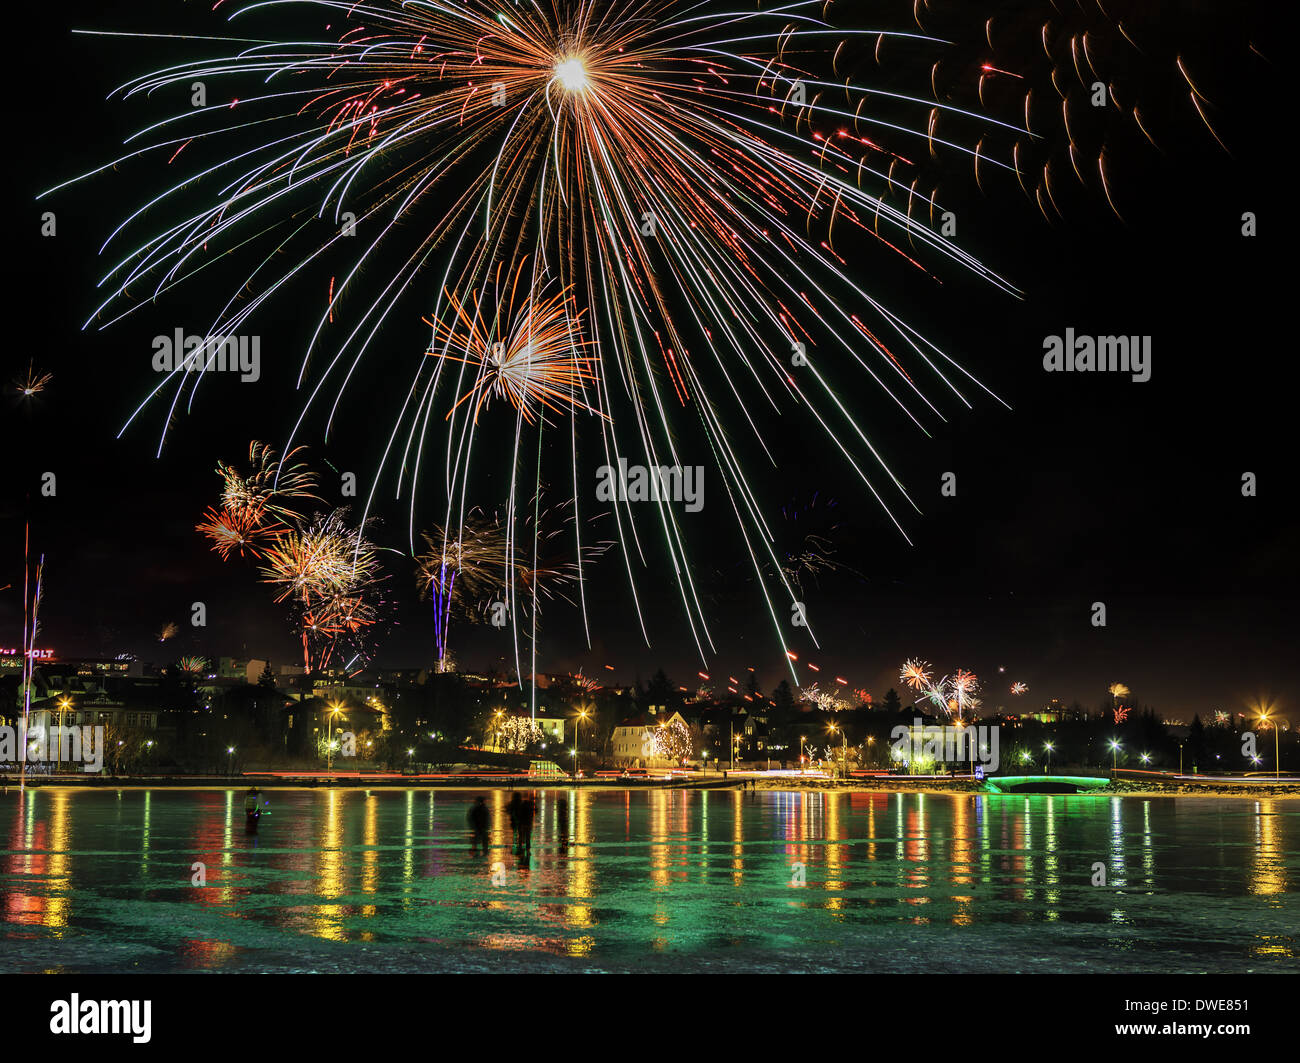 Fireworks over the pond in Reykjavik, New Years' Eve, Iceland Stock Photo